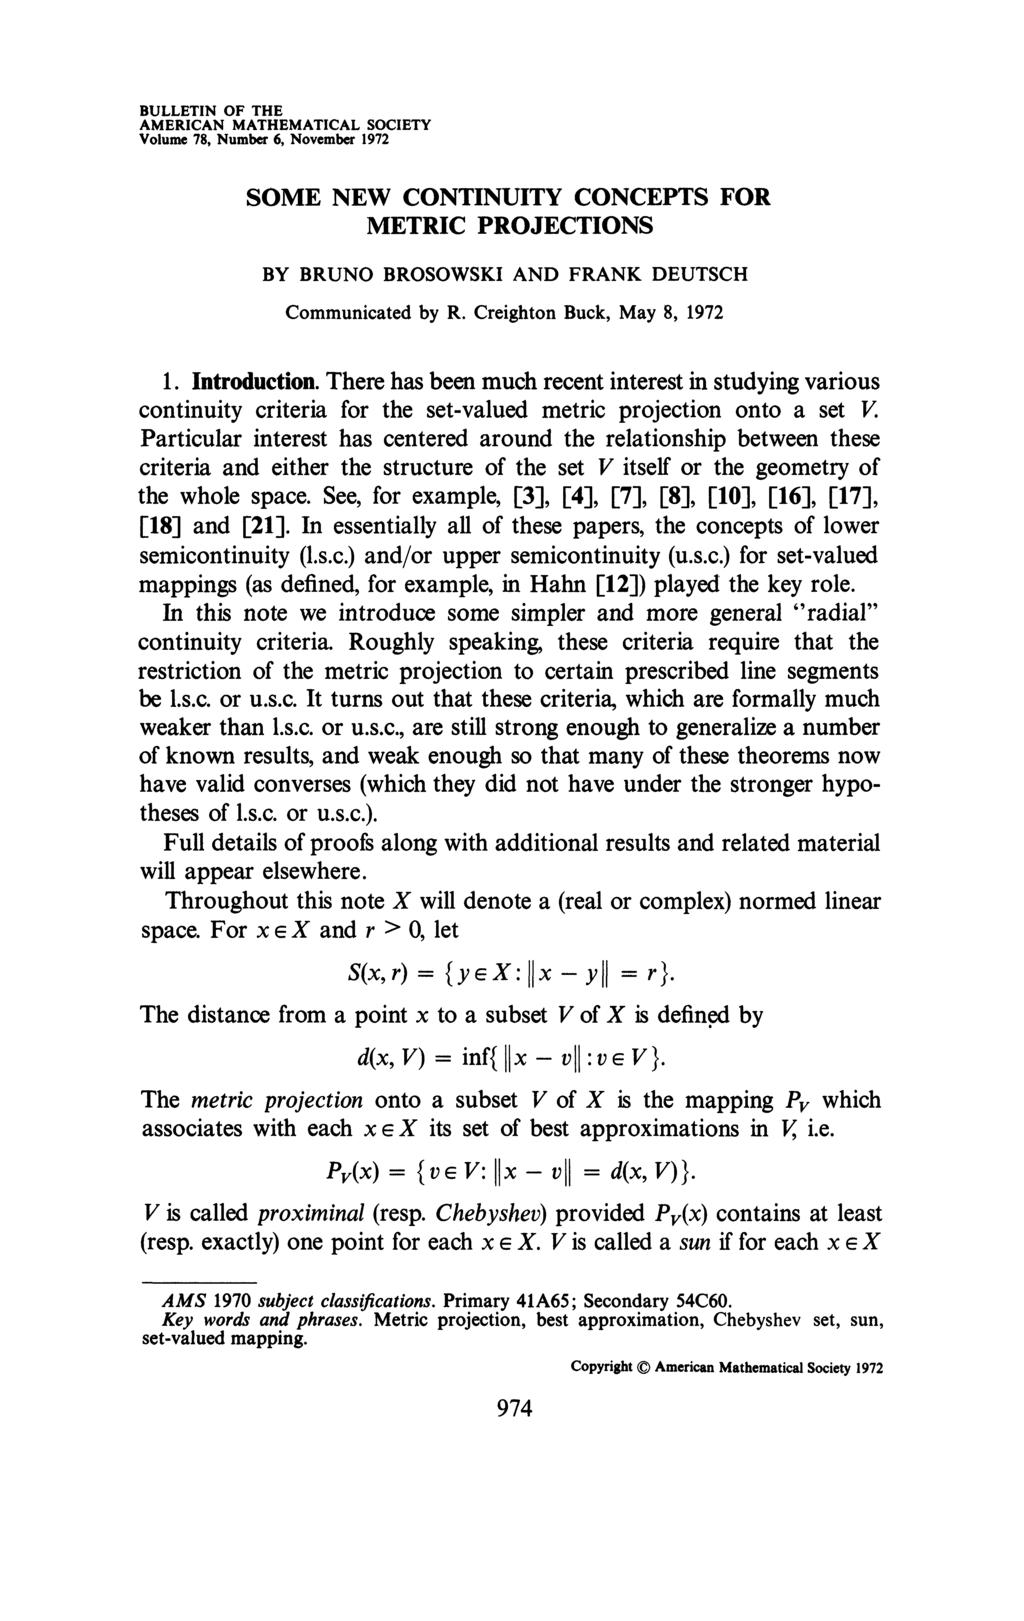 BULLETIN OF THE AMERICAN MATHEMATICAL SOCIETY Volume 78, Number 6, November 1972 SOME NEW CONTINUITY CONCEPTS FOR METRIC PROJECTIONS BY BRUNO BROSOWSKI AND FRANK DEUTSCH Communicated by R.